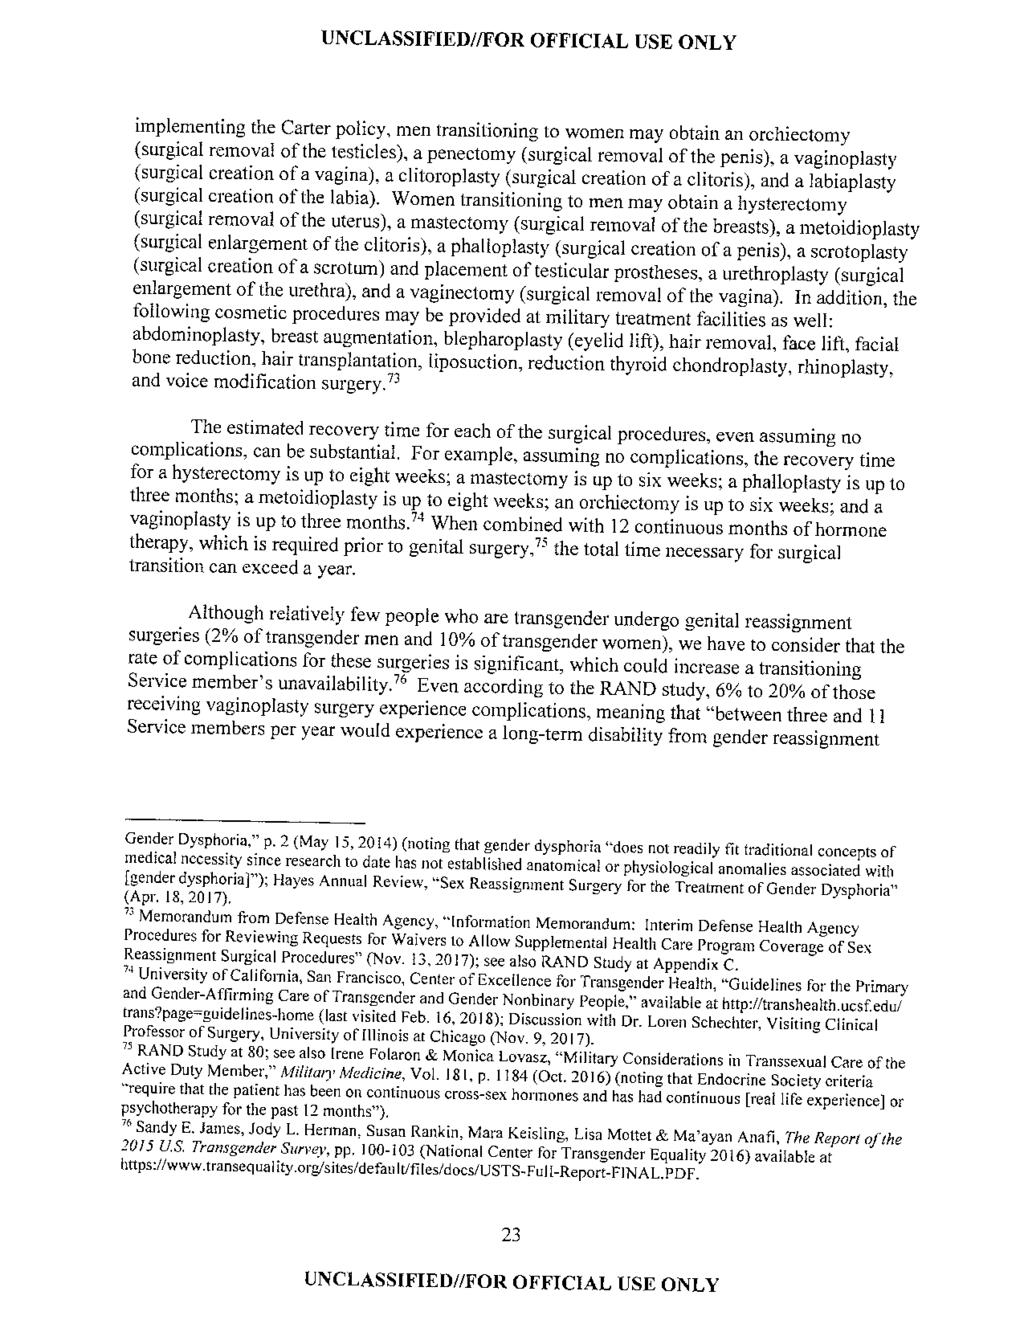 Case 1:17-cv-01597-CKK UNCLASSIFIED//FOR Document 96-2 OFFICIAL Filed USE 03/23/18 ONLY Page 25 of 46 implementing the Carter policy, men transitioning to women may obtain an orchiectorny (surgical